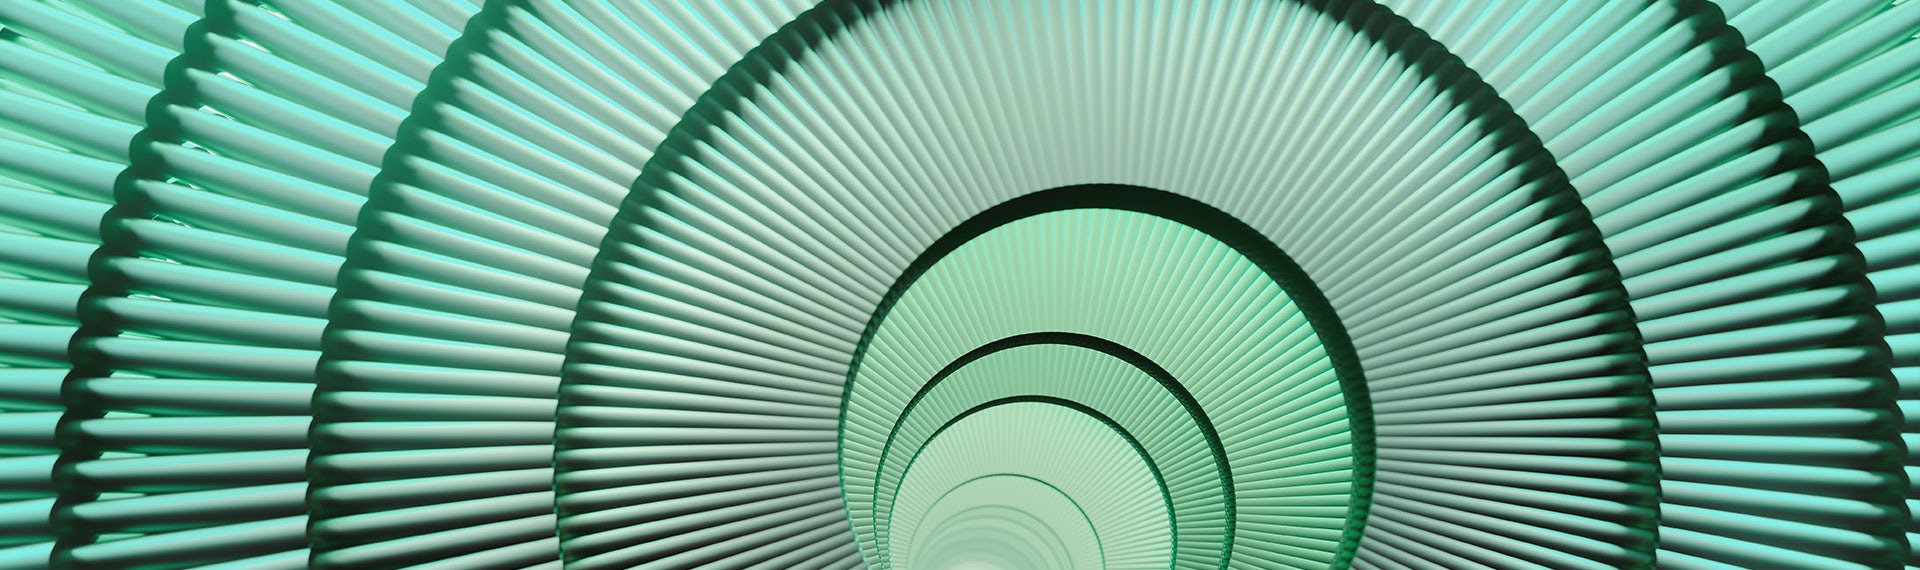 An abstract image of a green spiral tunnel.